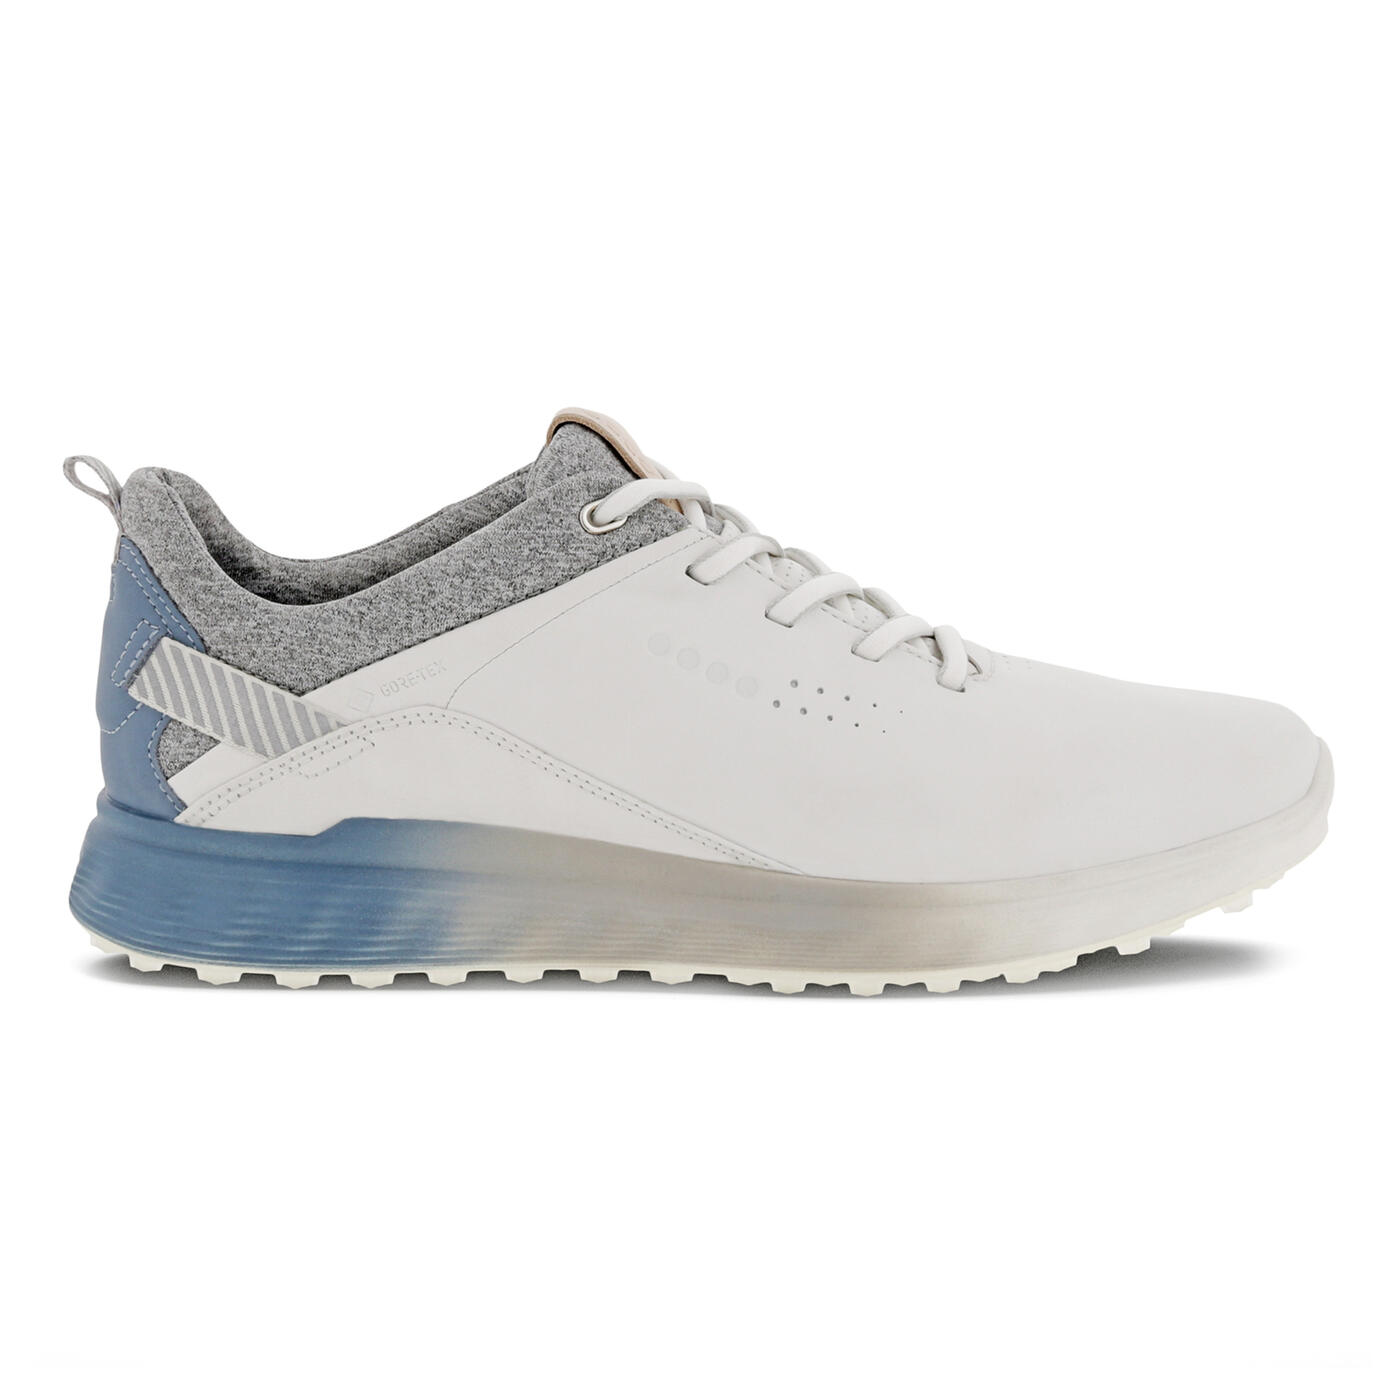 Women's S-Three Spikeless Golf Shoes | ECCO® Shoes